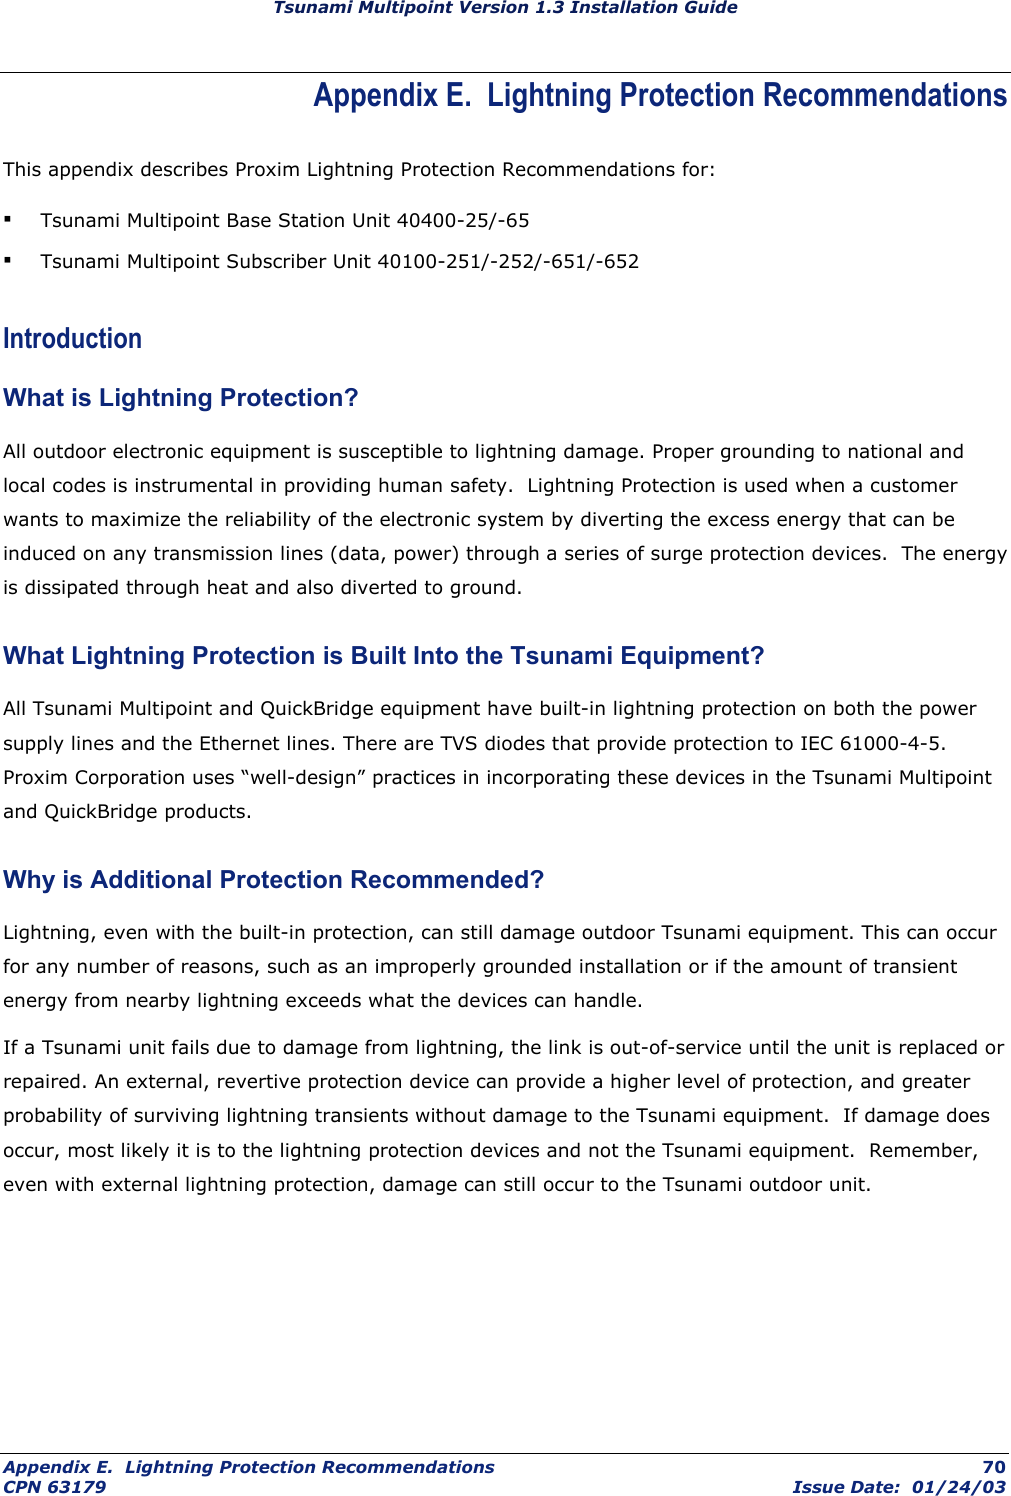 Tsunami Multipoint Version 1.3 Installation Guide Appendix E.  Lightning Protection Recommendations This appendix describes Proxim Lightning Protection Recommendations for: ▪ Tsunami Multipoint Base Station Unit 40400-25/-65 ▪ Tsunami Multipoint Subscriber Unit 40100-251/-252/-651/-652 Introduction What is Lightning Protection? All outdoor electronic equipment is susceptible to lightning damage. Proper grounding to national and local codes is instrumental in providing human safety.  Lightning Protection is used when a customer wants to maximize the reliability of the electronic system by diverting the excess energy that can be induced on any transmission lines (data, power) through a series of surge protection devices.  The energy is dissipated through heat and also diverted to ground.  What Lightning Protection is Built Into the Tsunami Equipment? All Tsunami Multipoint and QuickBridge equipment have built-in lightning protection on both the power supply lines and the Ethernet lines. There are TVS diodes that provide protection to IEC 61000-4-5.  Proxim Corporation uses “well-design” practices in incorporating these devices in the Tsunami Multipoint and QuickBridge products. Why is Additional Protection Recommended?  Lightning, even with the built-in protection, can still damage outdoor Tsunami equipment. This can occur for any number of reasons, such as an improperly grounded installation or if the amount of transient energy from nearby lightning exceeds what the devices can handle. If a Tsunami unit fails due to damage from lightning, the link is out-of-service until the unit is replaced or repaired. An external, revertive protection device can provide a higher level of protection, and greater probability of surviving lightning transients without damage to the Tsunami equipment.  If damage does occur, most likely it is to the lightning protection devices and not the Tsunami equipment.  Remember, even with external lightning protection, damage can still occur to the Tsunami outdoor unit. Appendix E.  Lightning Protection Recommendations  70 CPN 63179  Issue Date:  01/24/03 